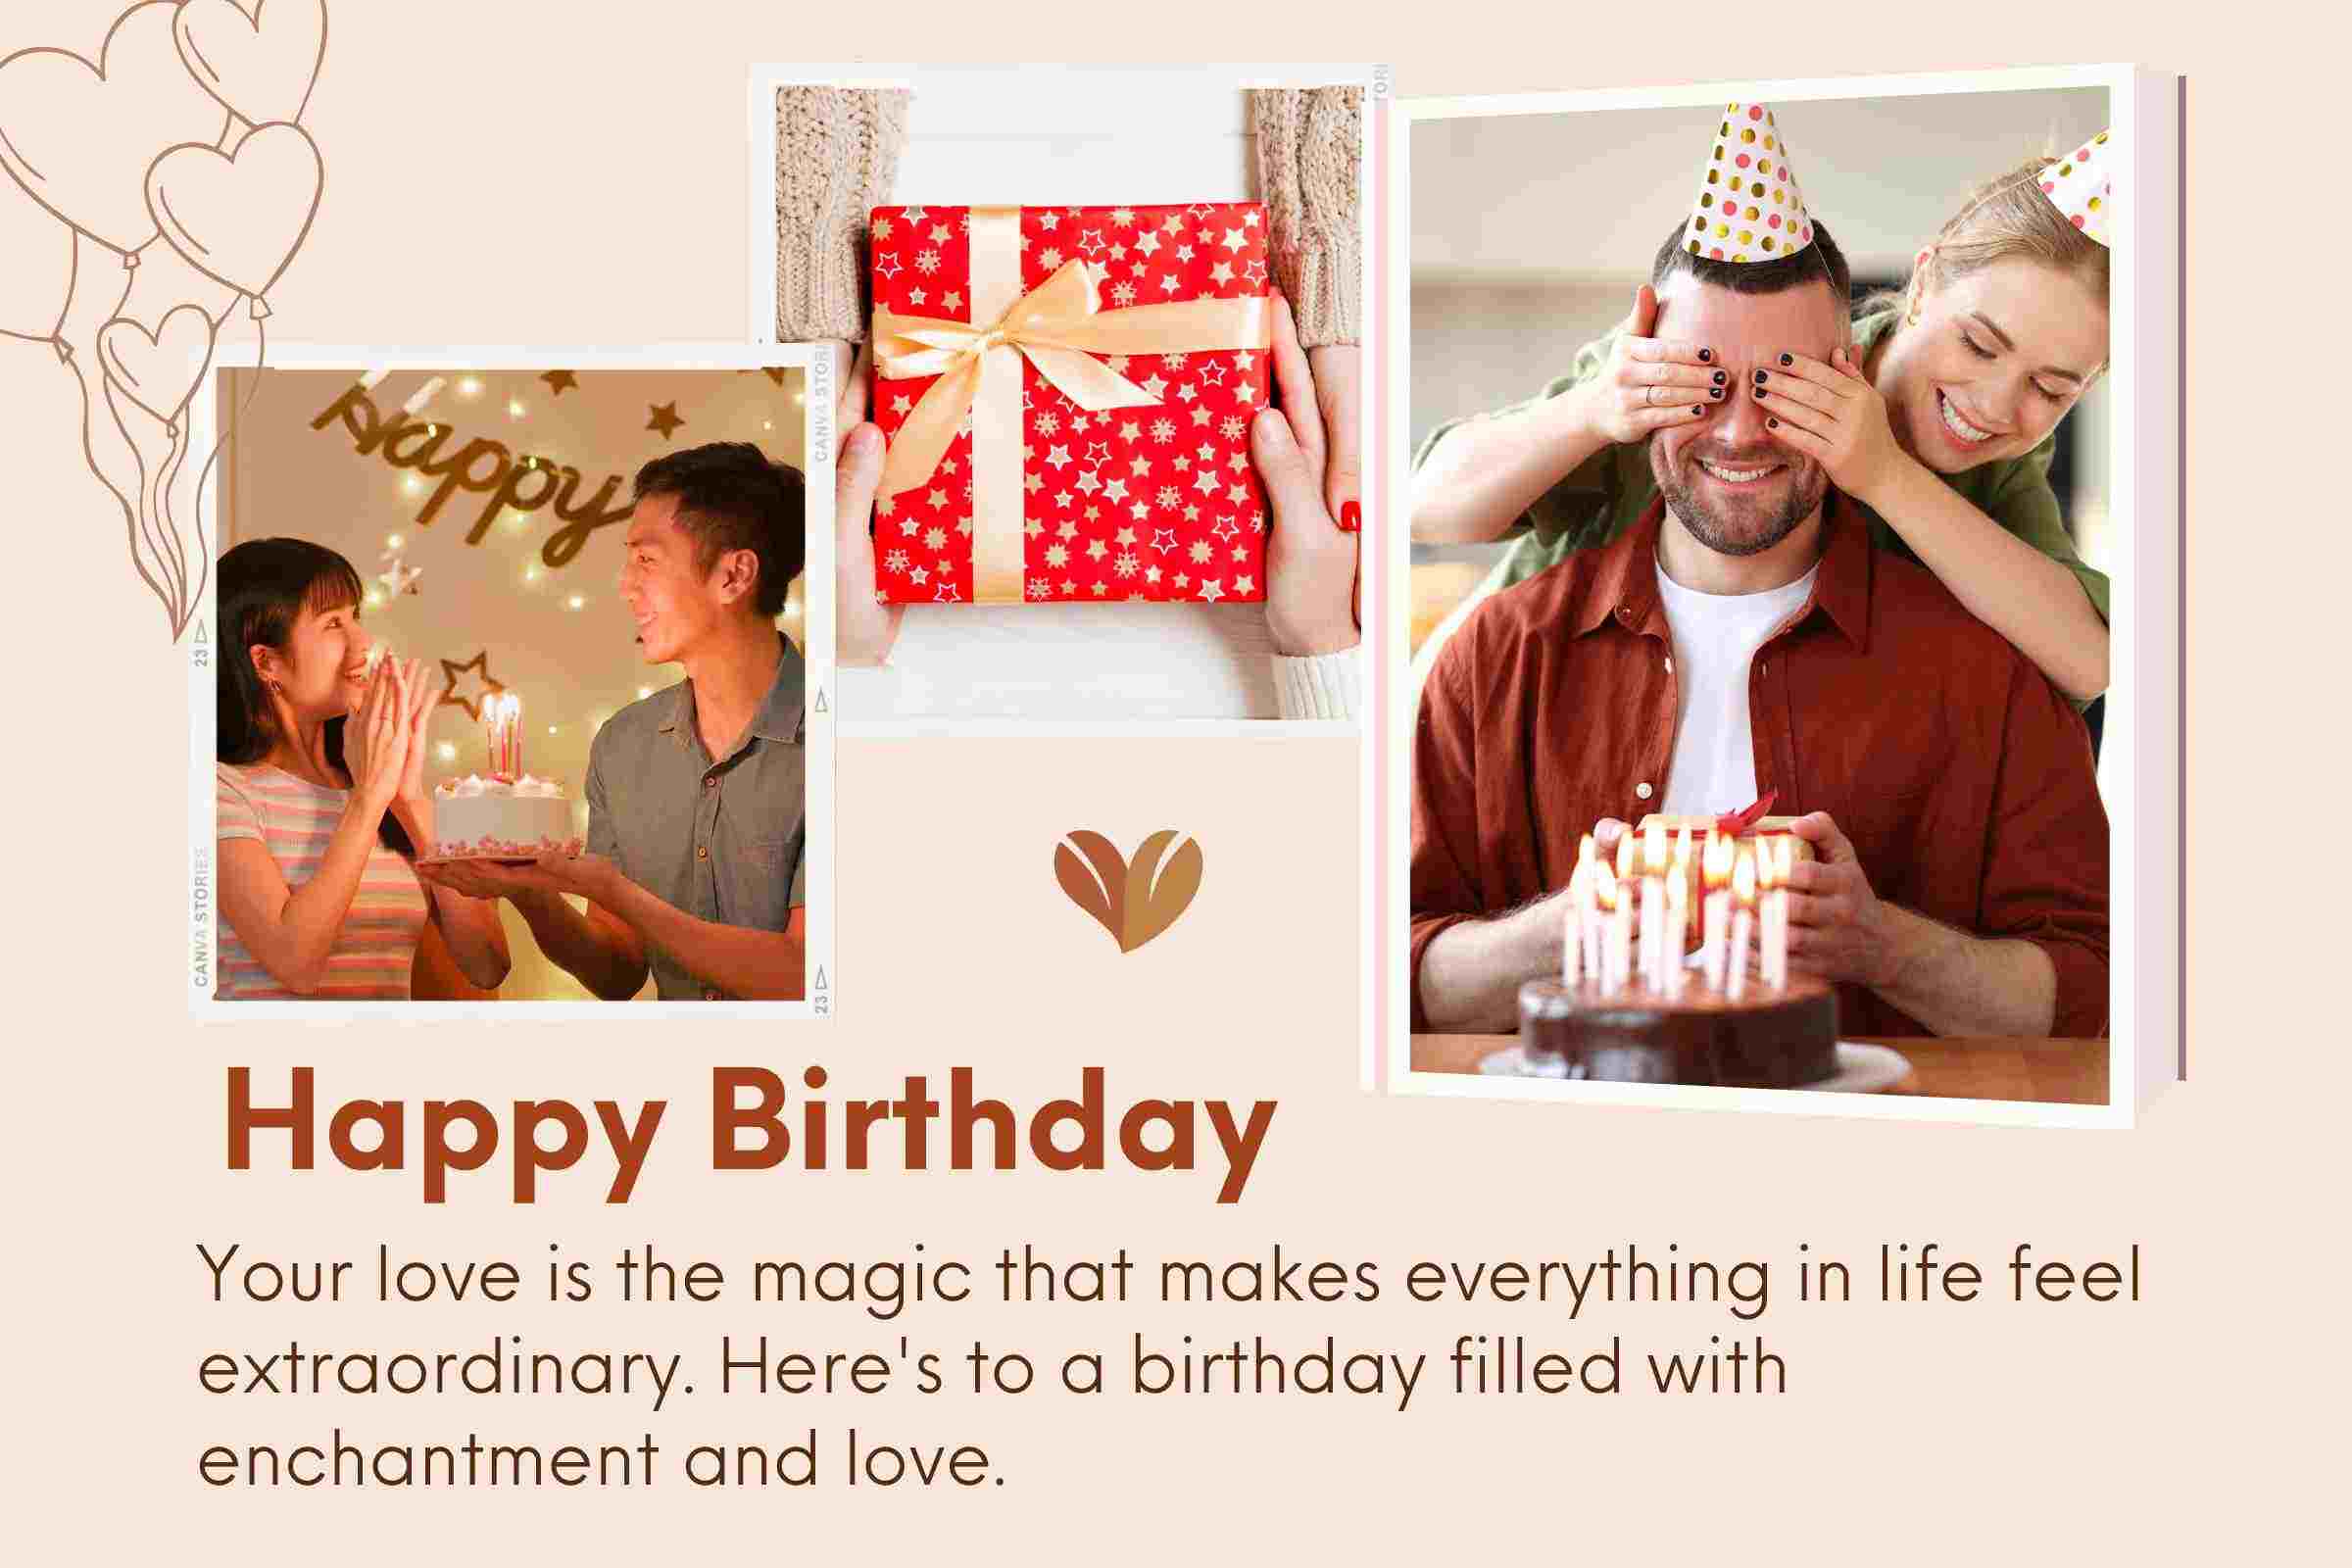 You are the love of my life - Heart touching birthday wishes for husband